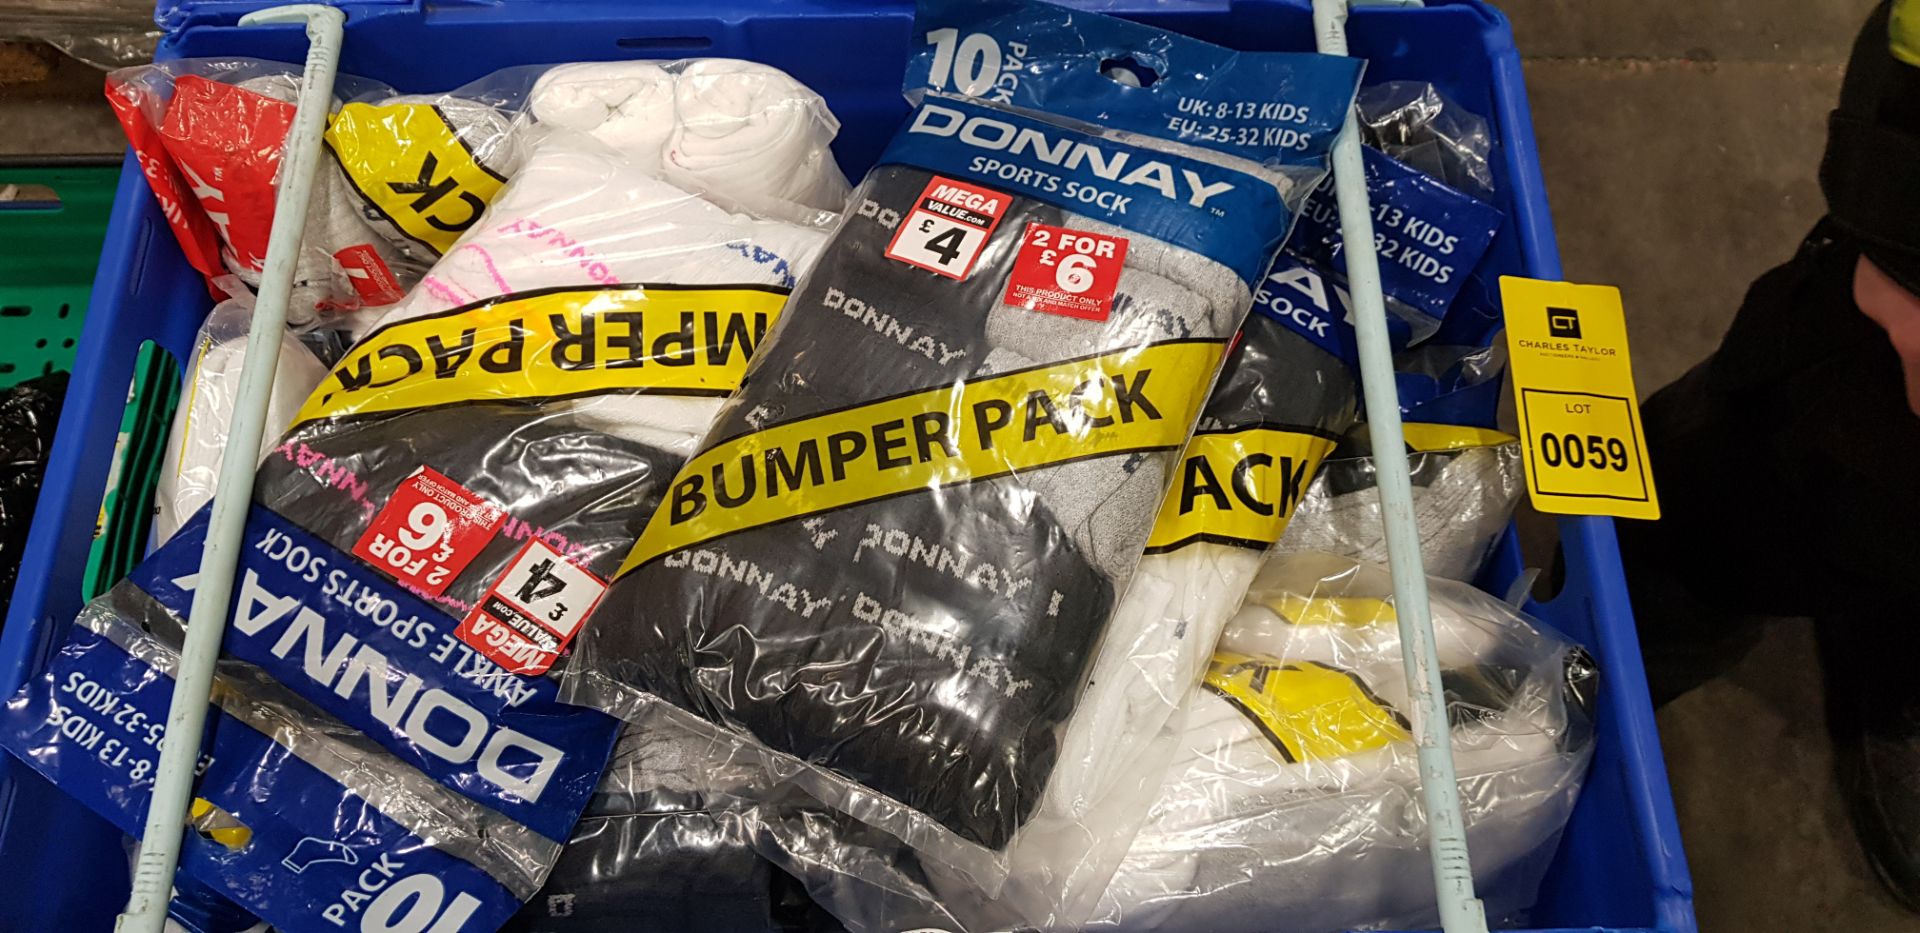 45 X BRAND NEW PACKS OF 10 PAIR OF DONNAY SPORT SOCKS IN VARIOUS STYLES, SIZES AND COLOURS IN 3 - Image 2 of 2